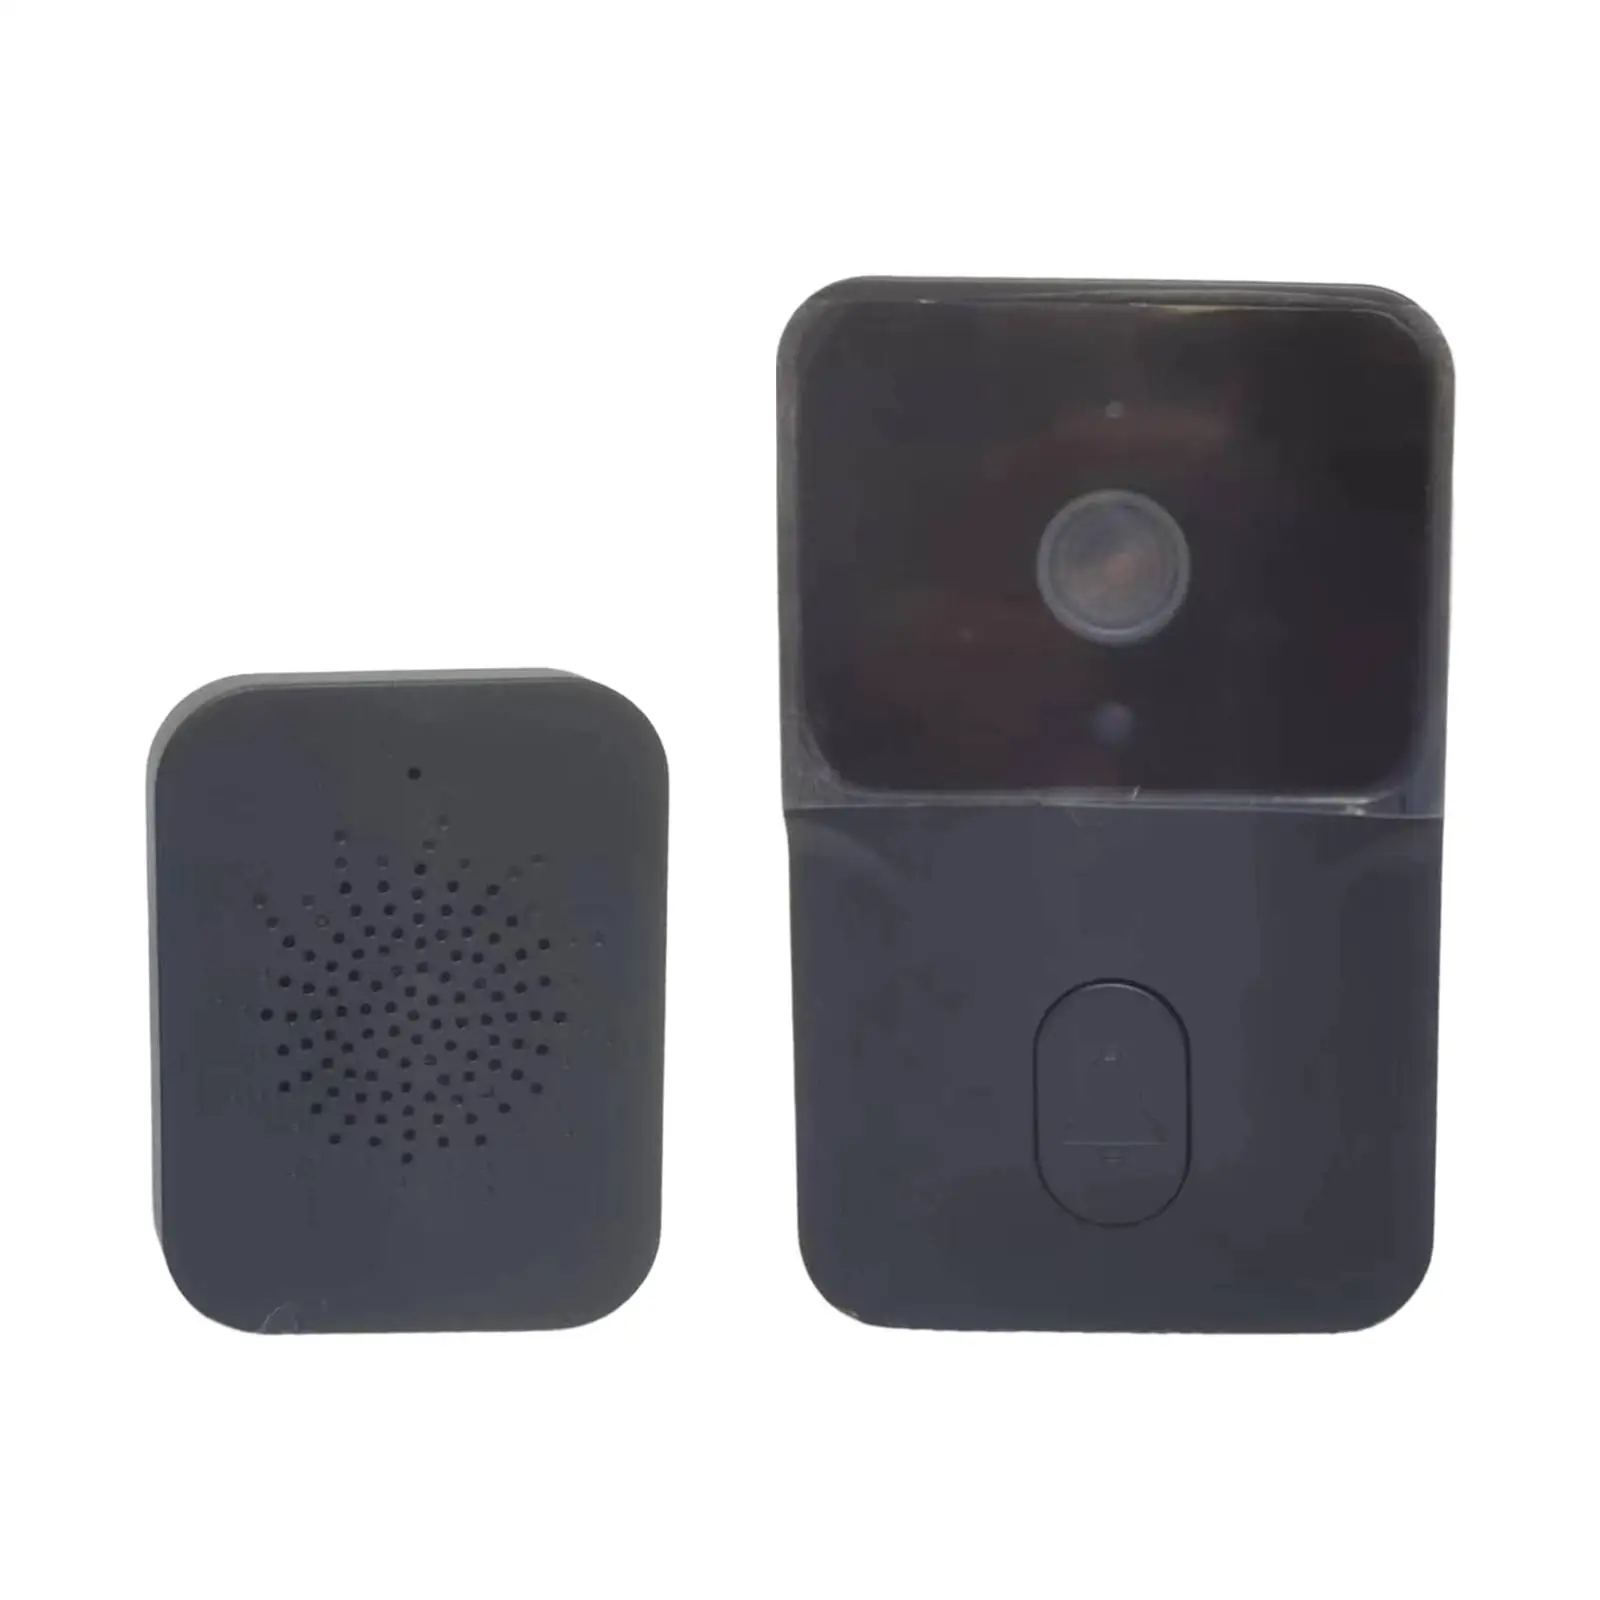 Wireless Camera WiFi Video for Playhouse Office Businesses